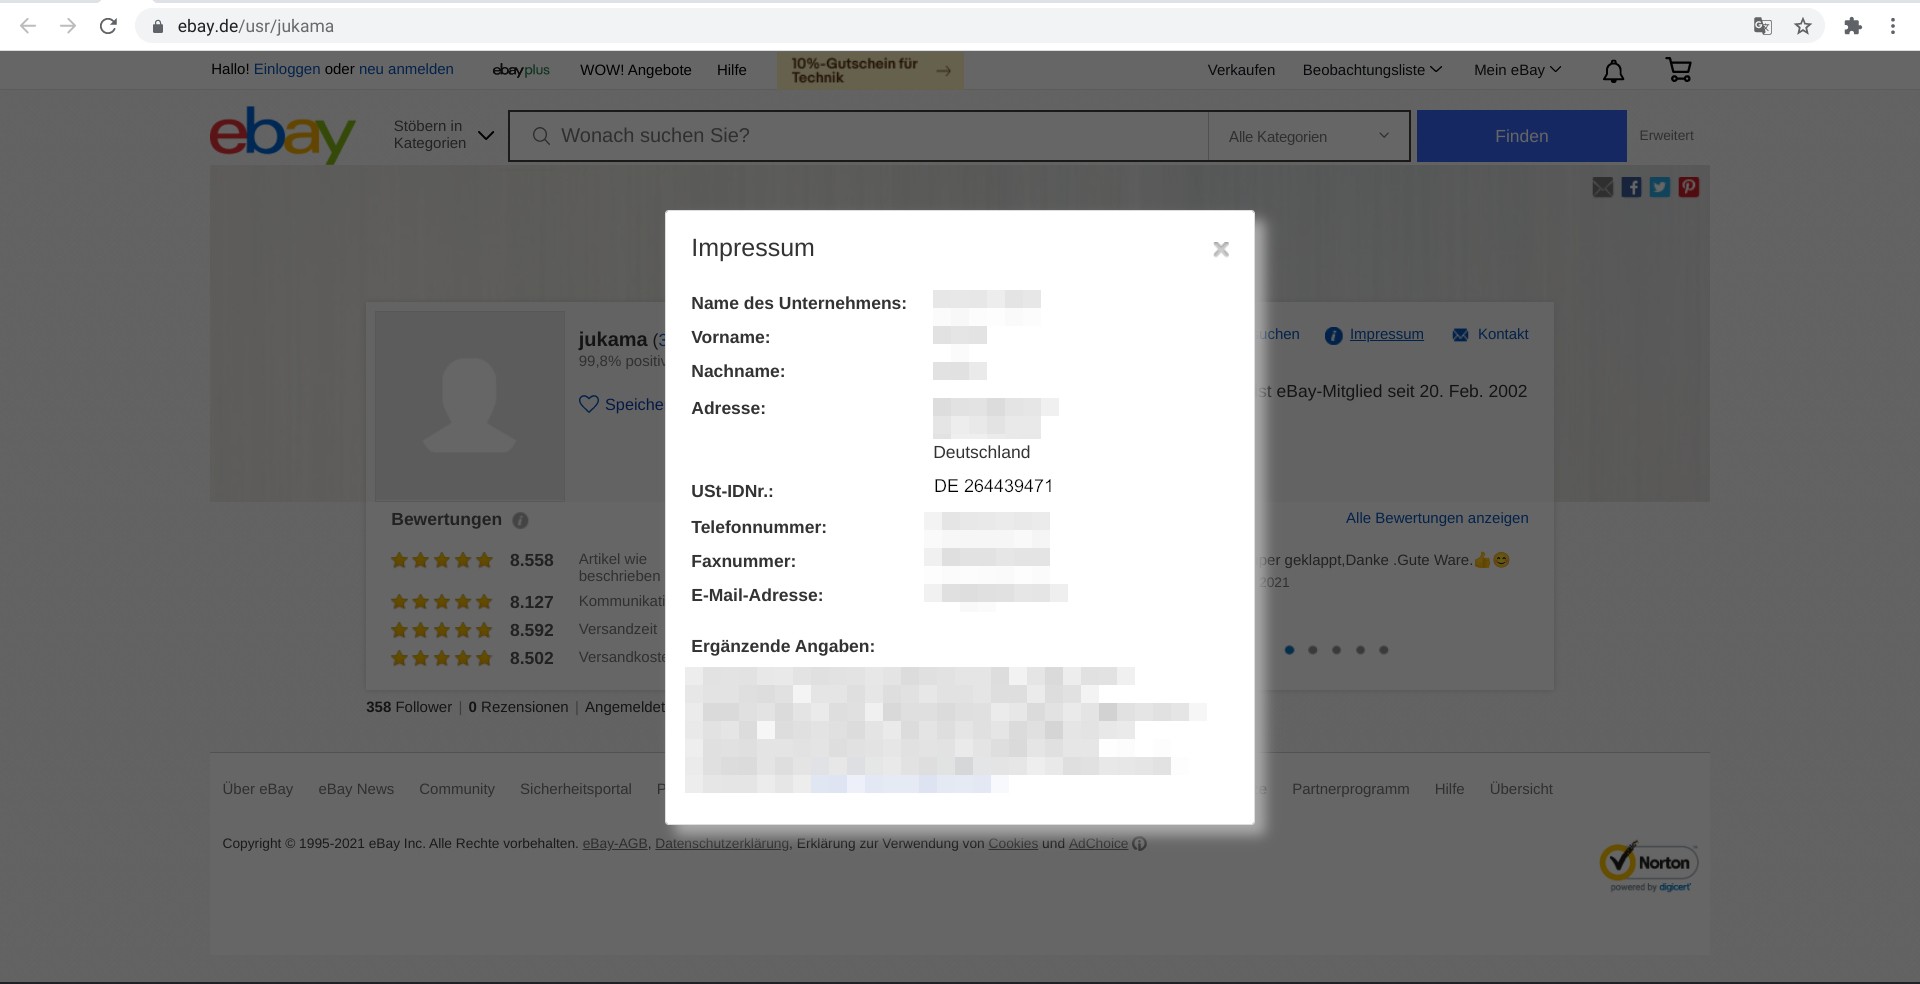 Screenshot of the Imprint containing the VAT ID of a seller on ebay.de